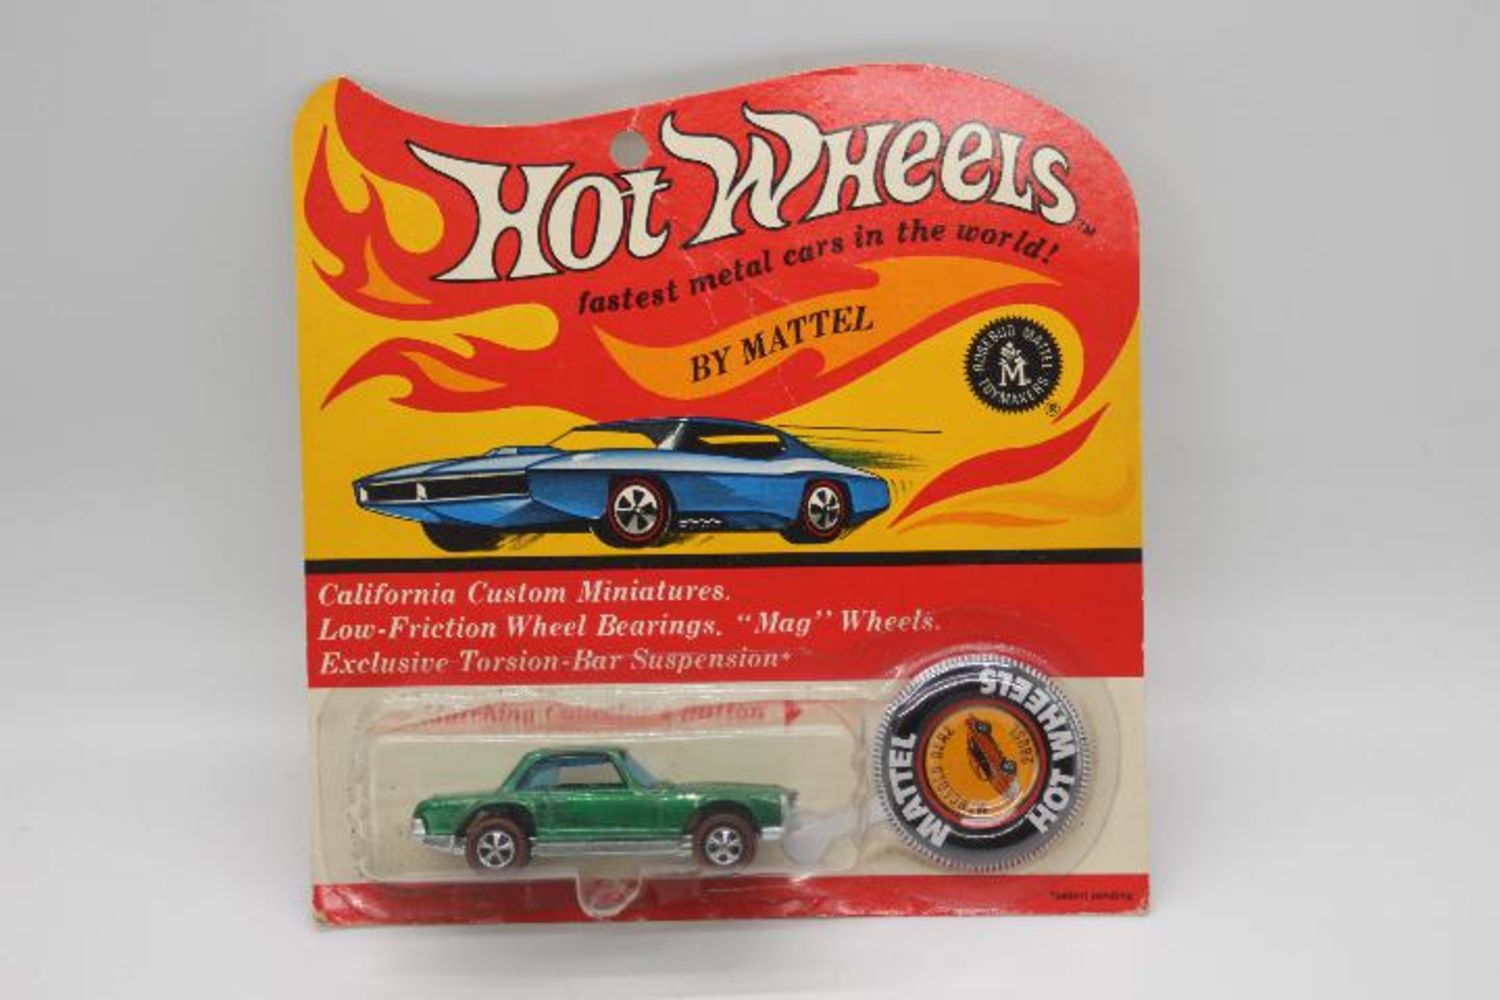 Sale of Vintage Toys and Models